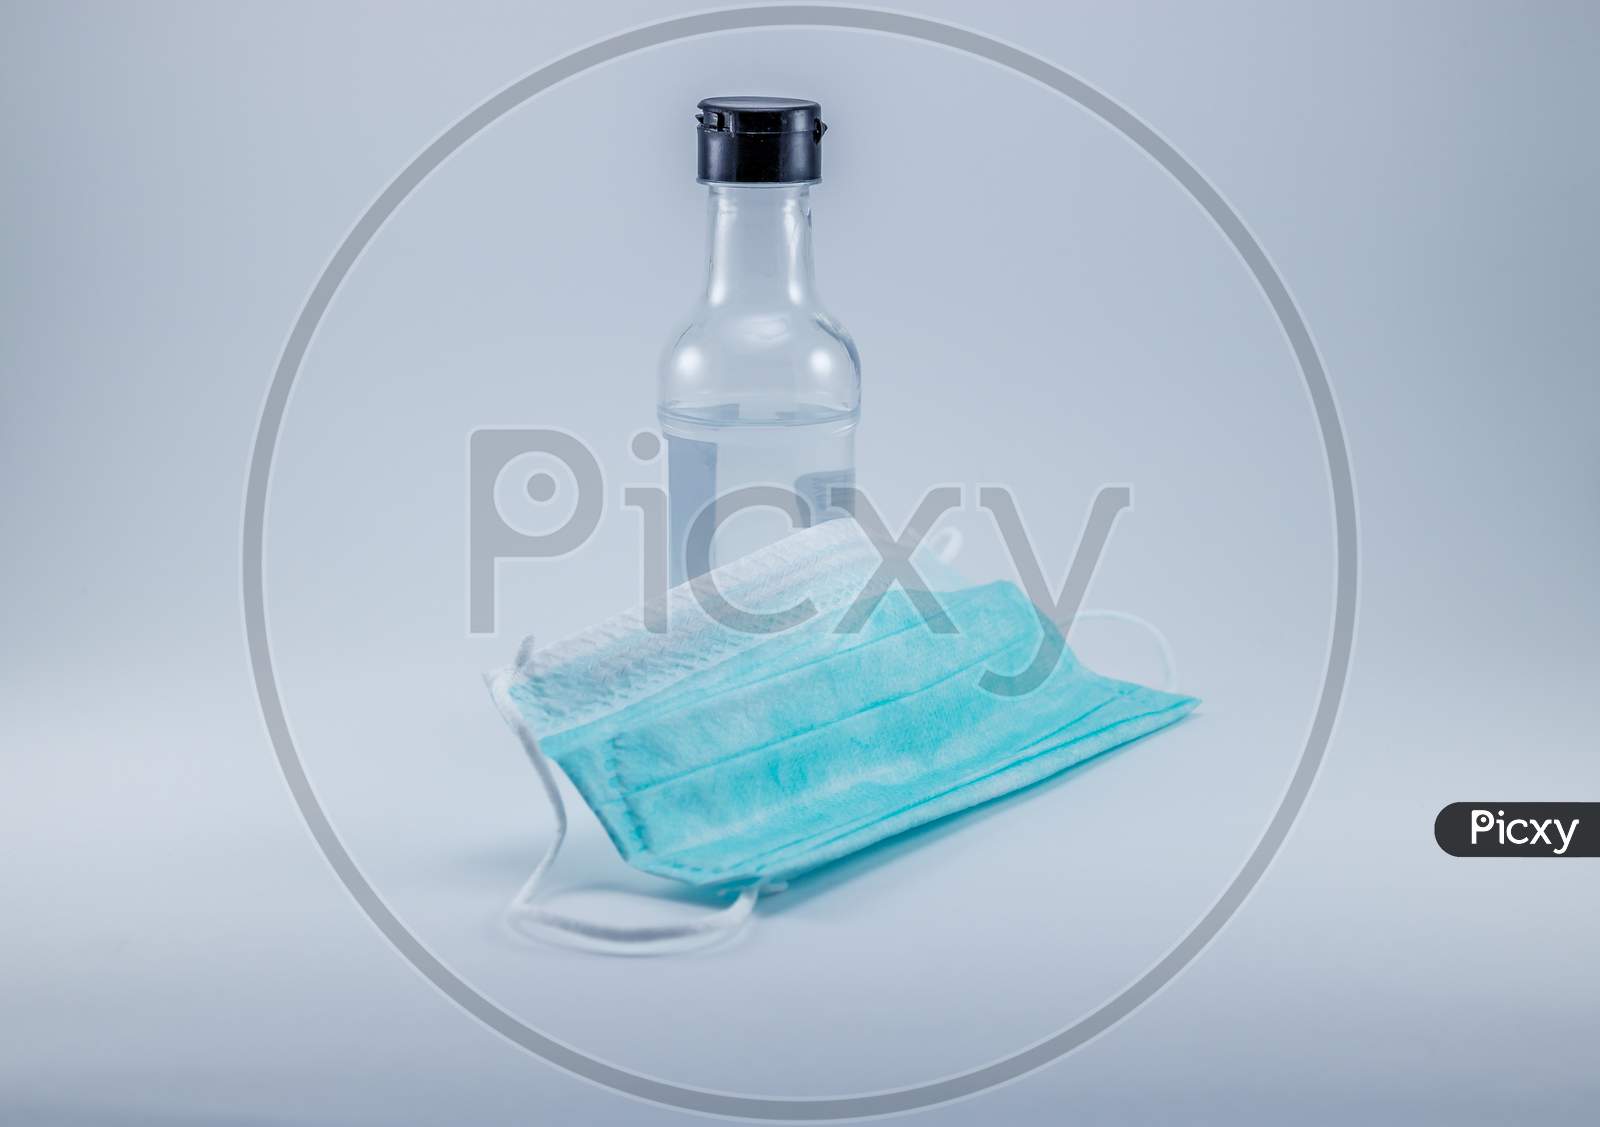 Alcohol Gel Hand Sanitizer and Disposable Hygienic or medical Mask, health care.